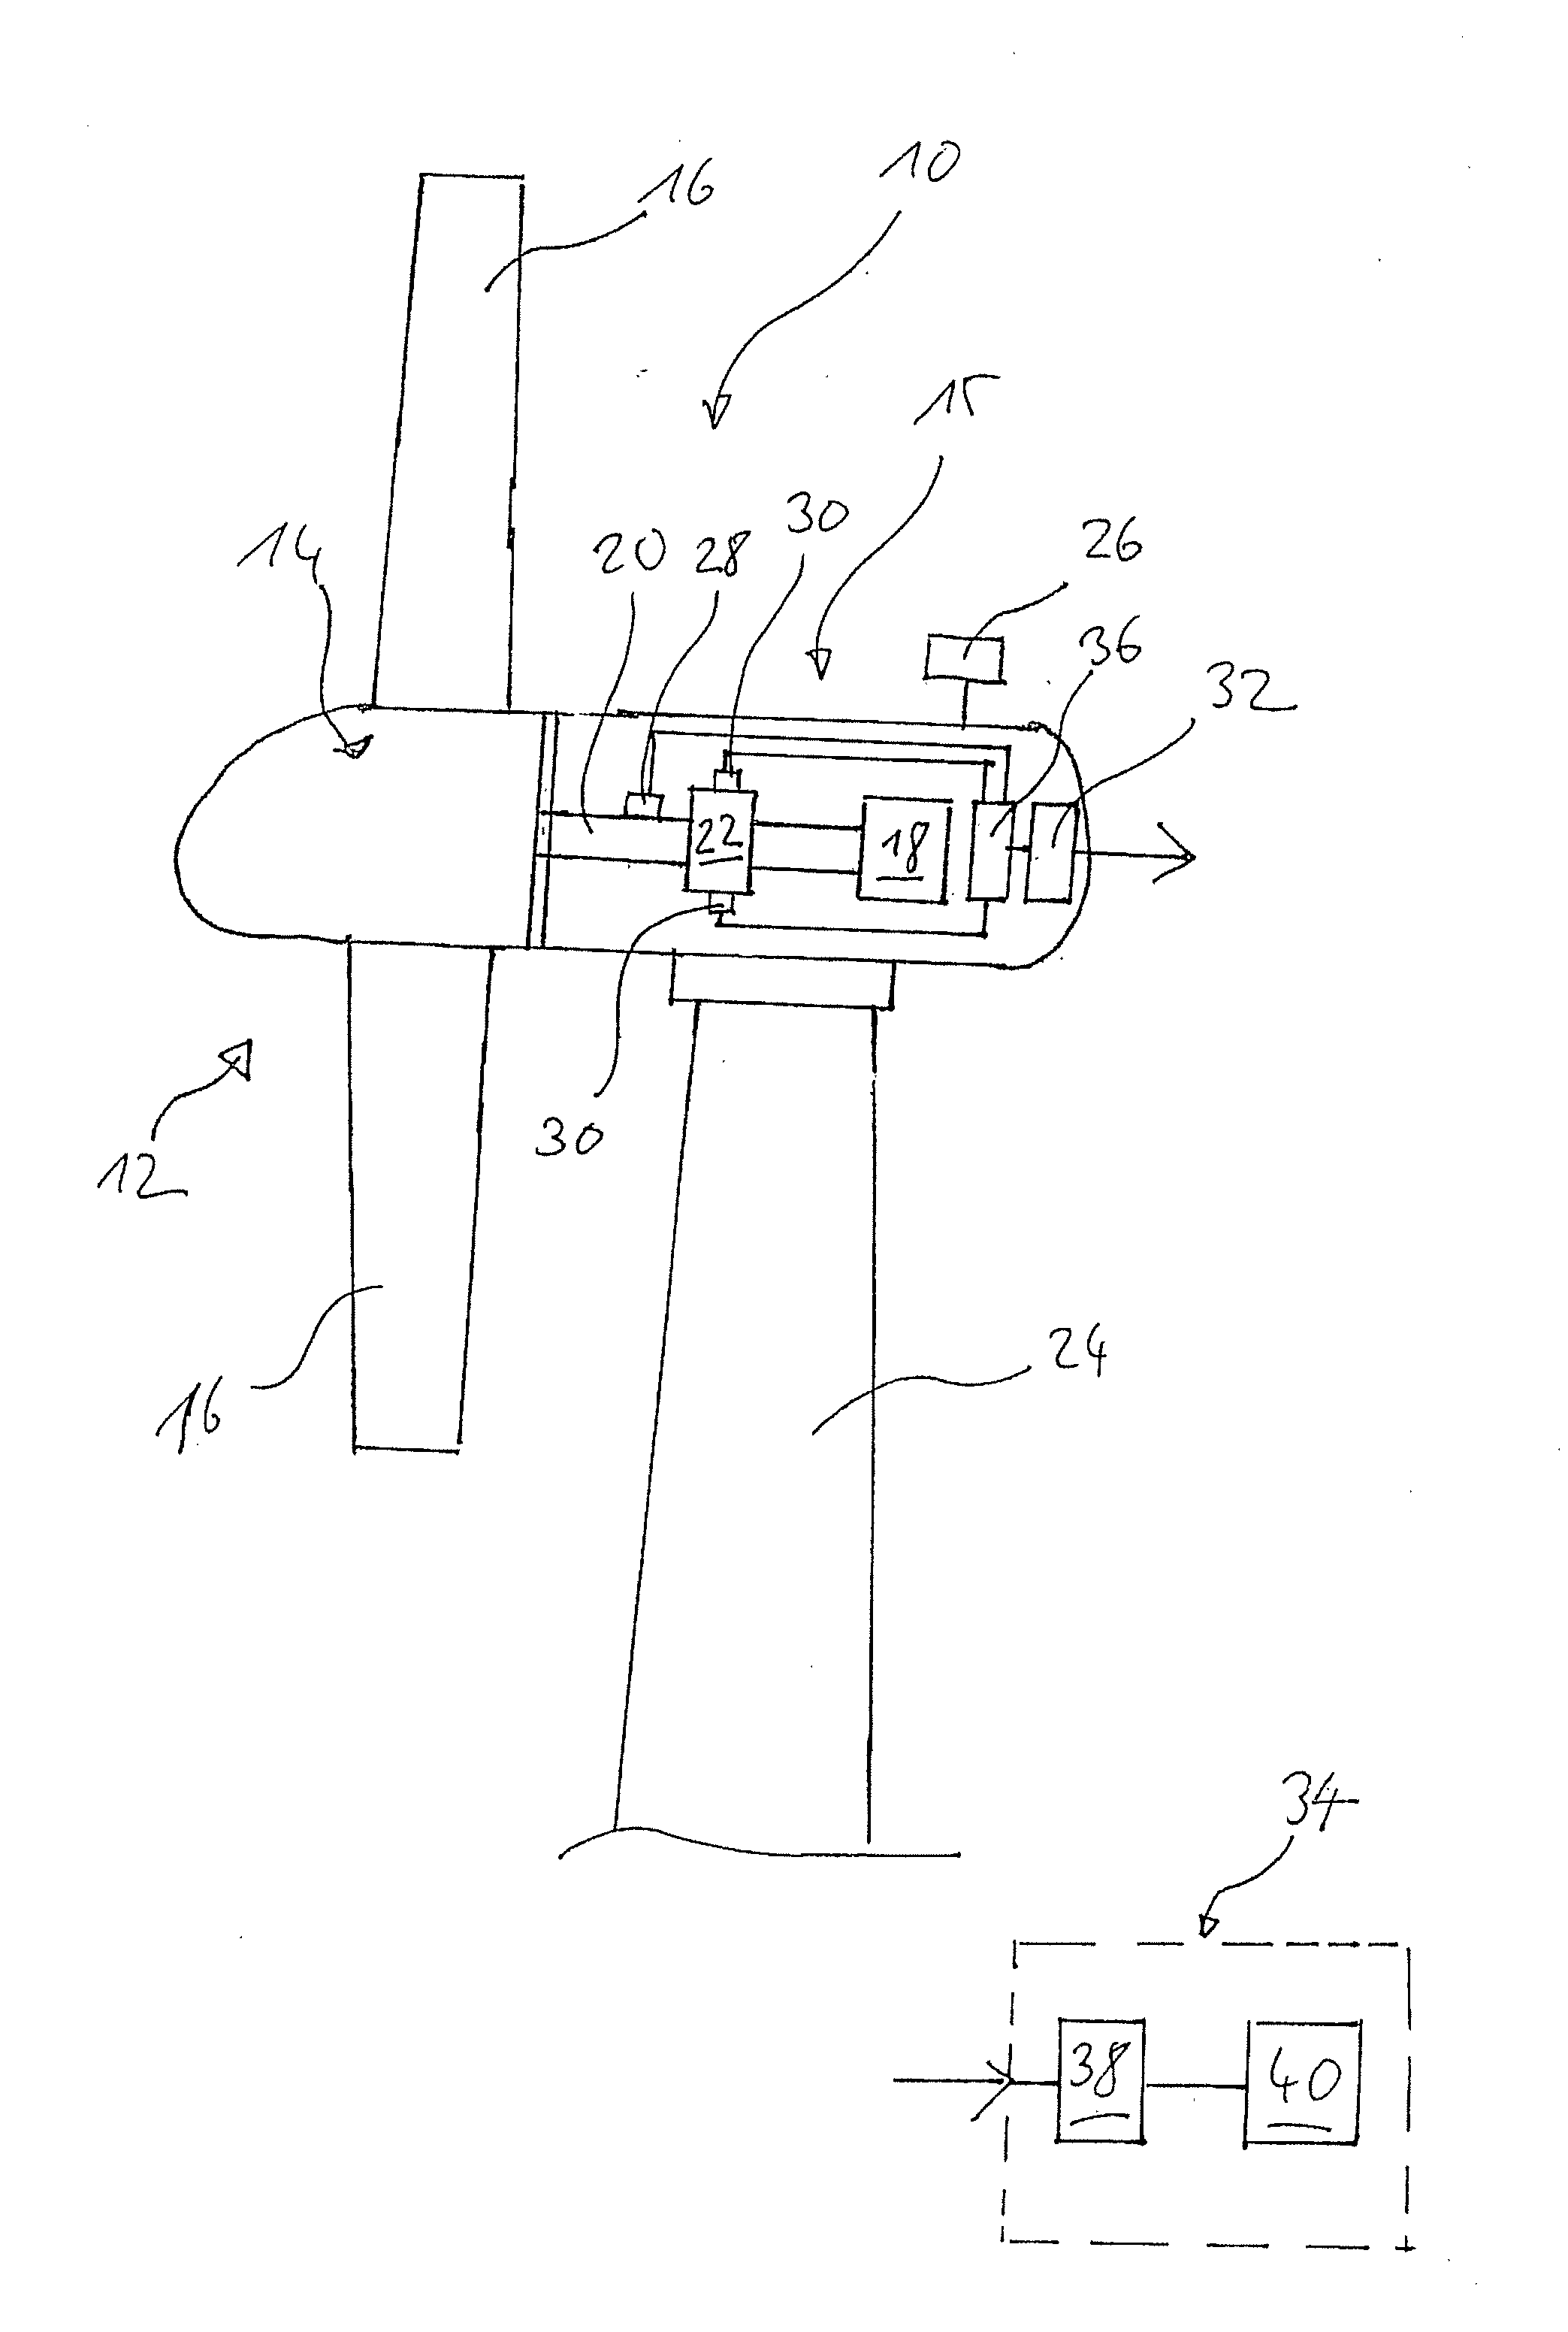 Process for monitoring a drive train component of a wind power plant